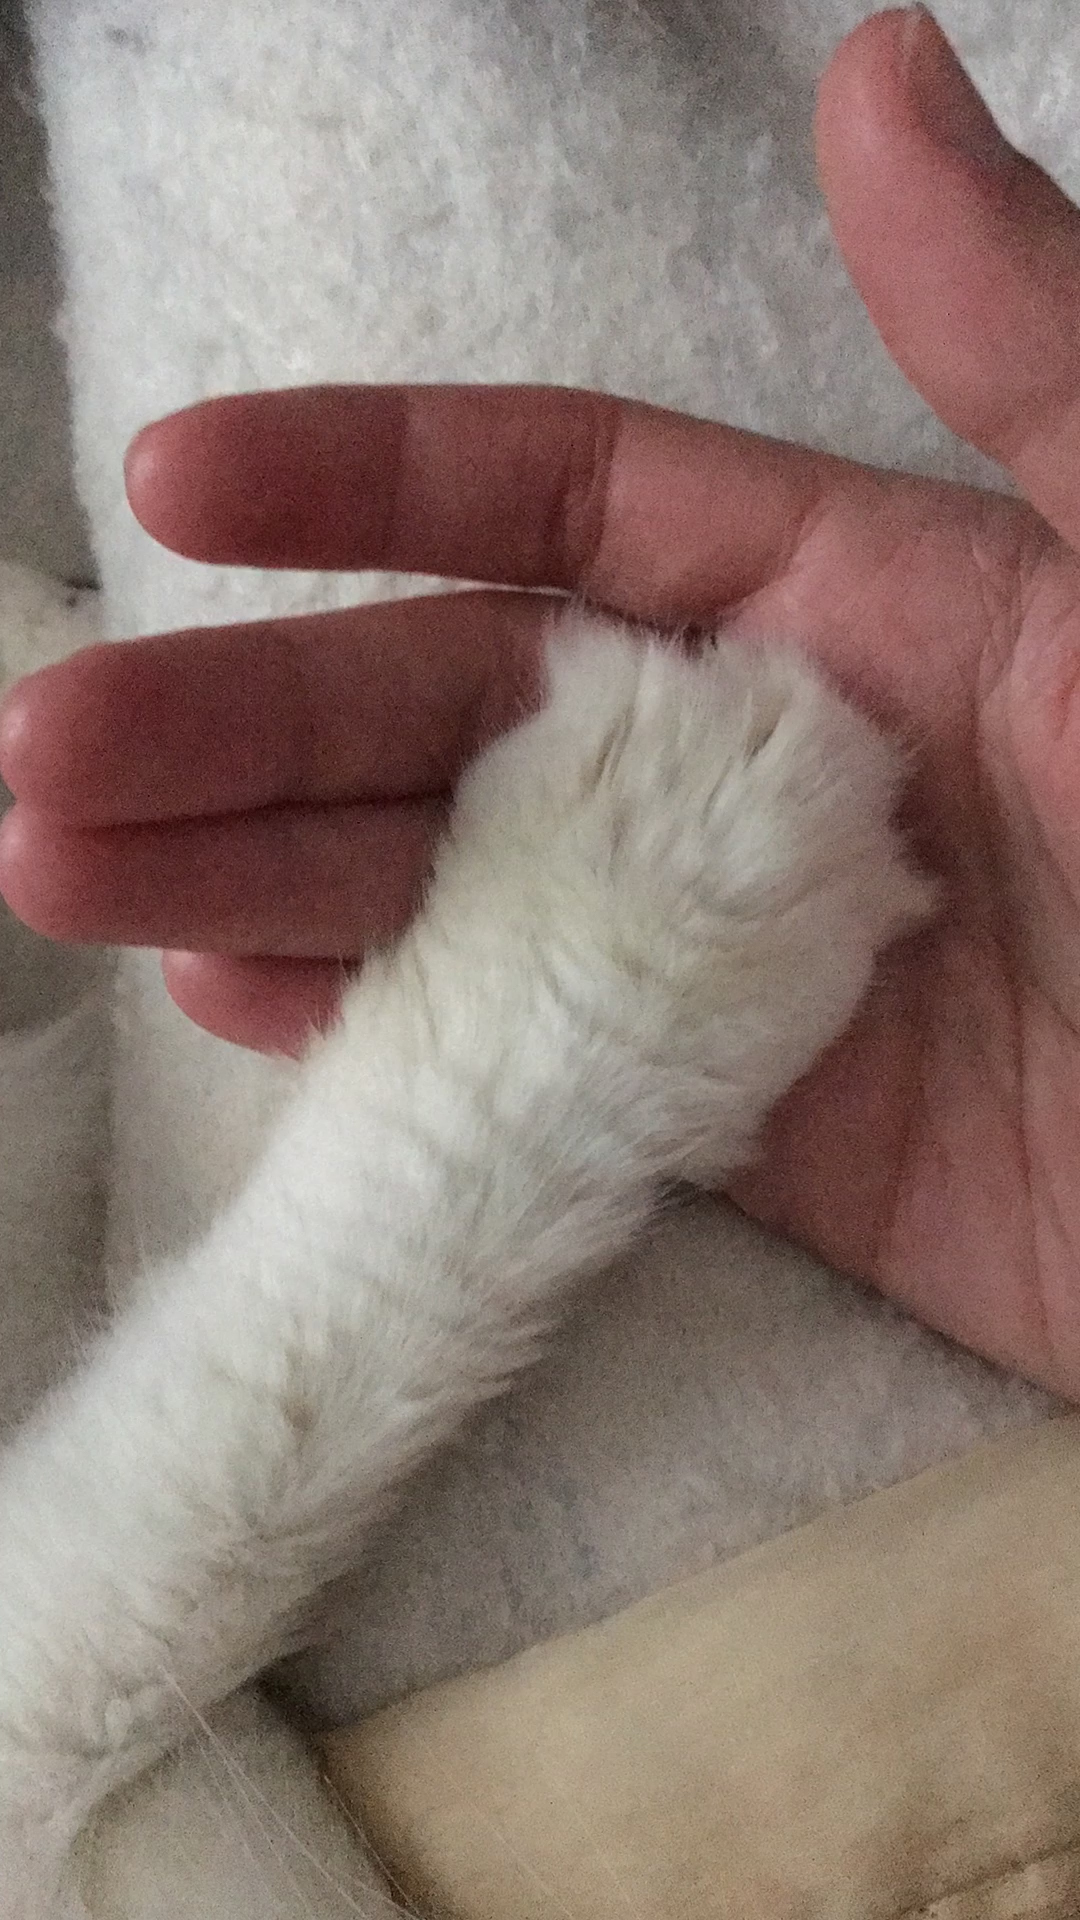 Leroo likes to hold hands.